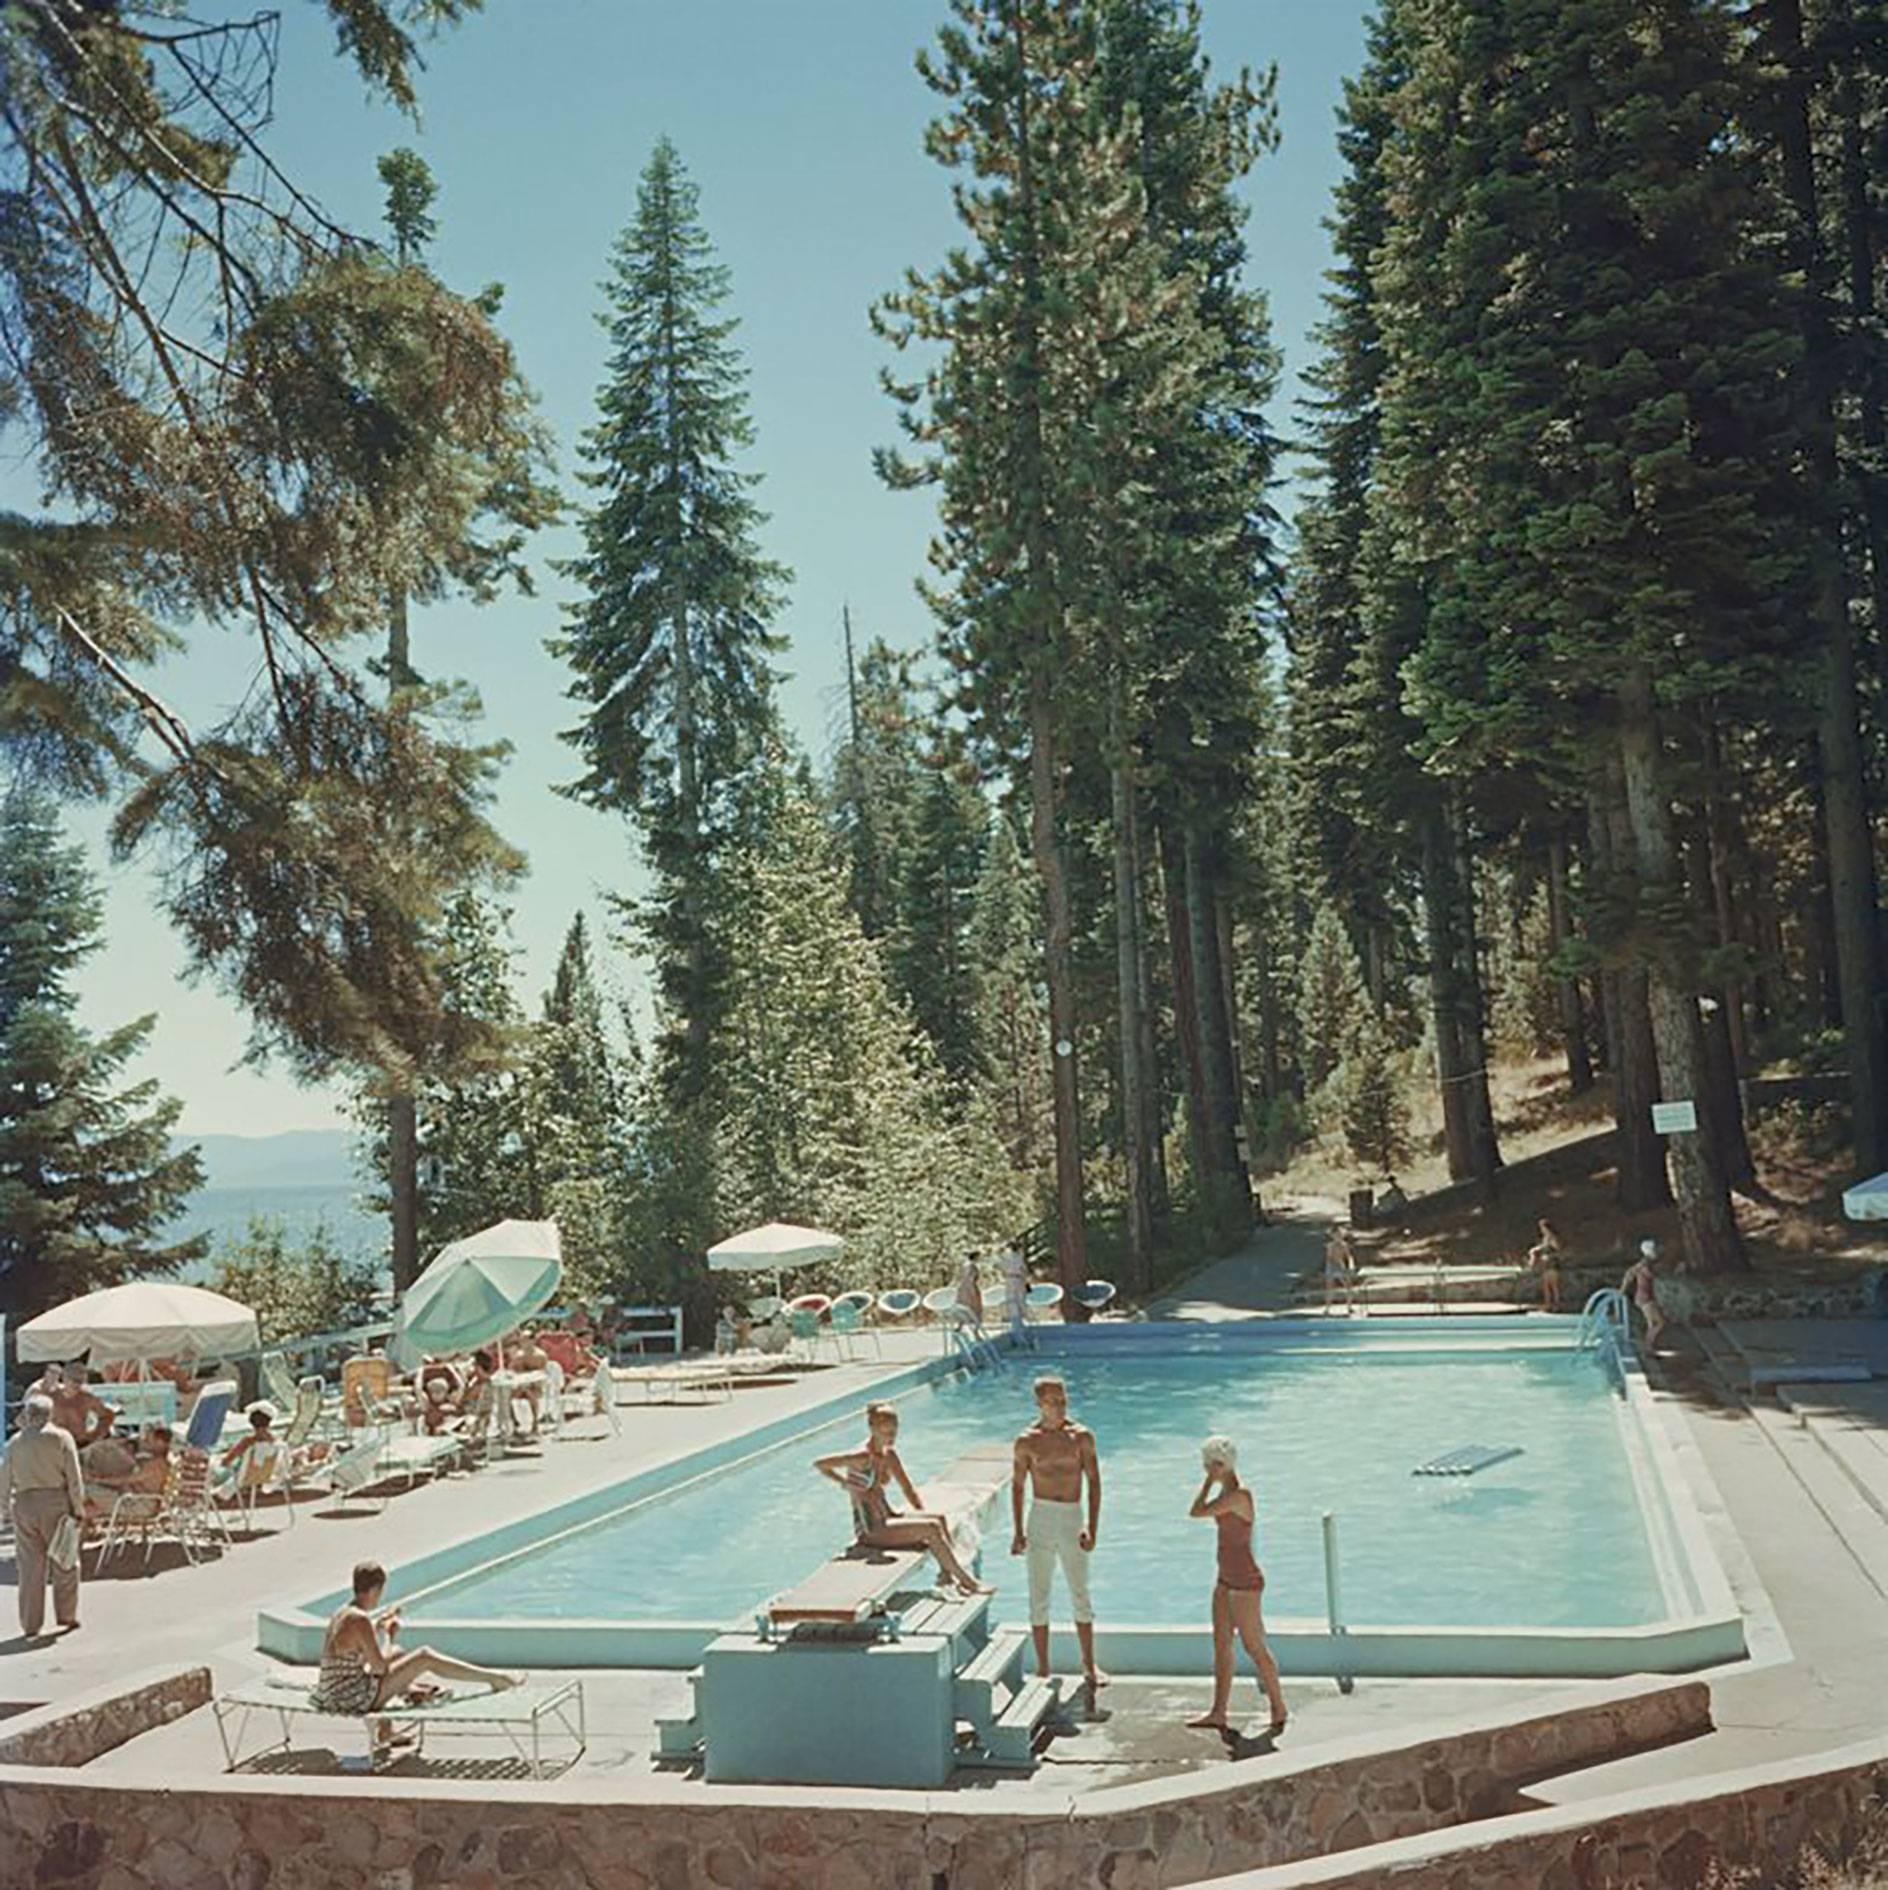 Bathers by a pool at the Tahoe Tavern on the shore of Lake Tahoe, California, 1959

Slim Aarons
Pool at Lake Tahoe
Chromogenic Lambda print
Slim Aarons Estate Edition
Printed Later
Complimentary dealer shipping to your framer, worldwide.

40 x 40